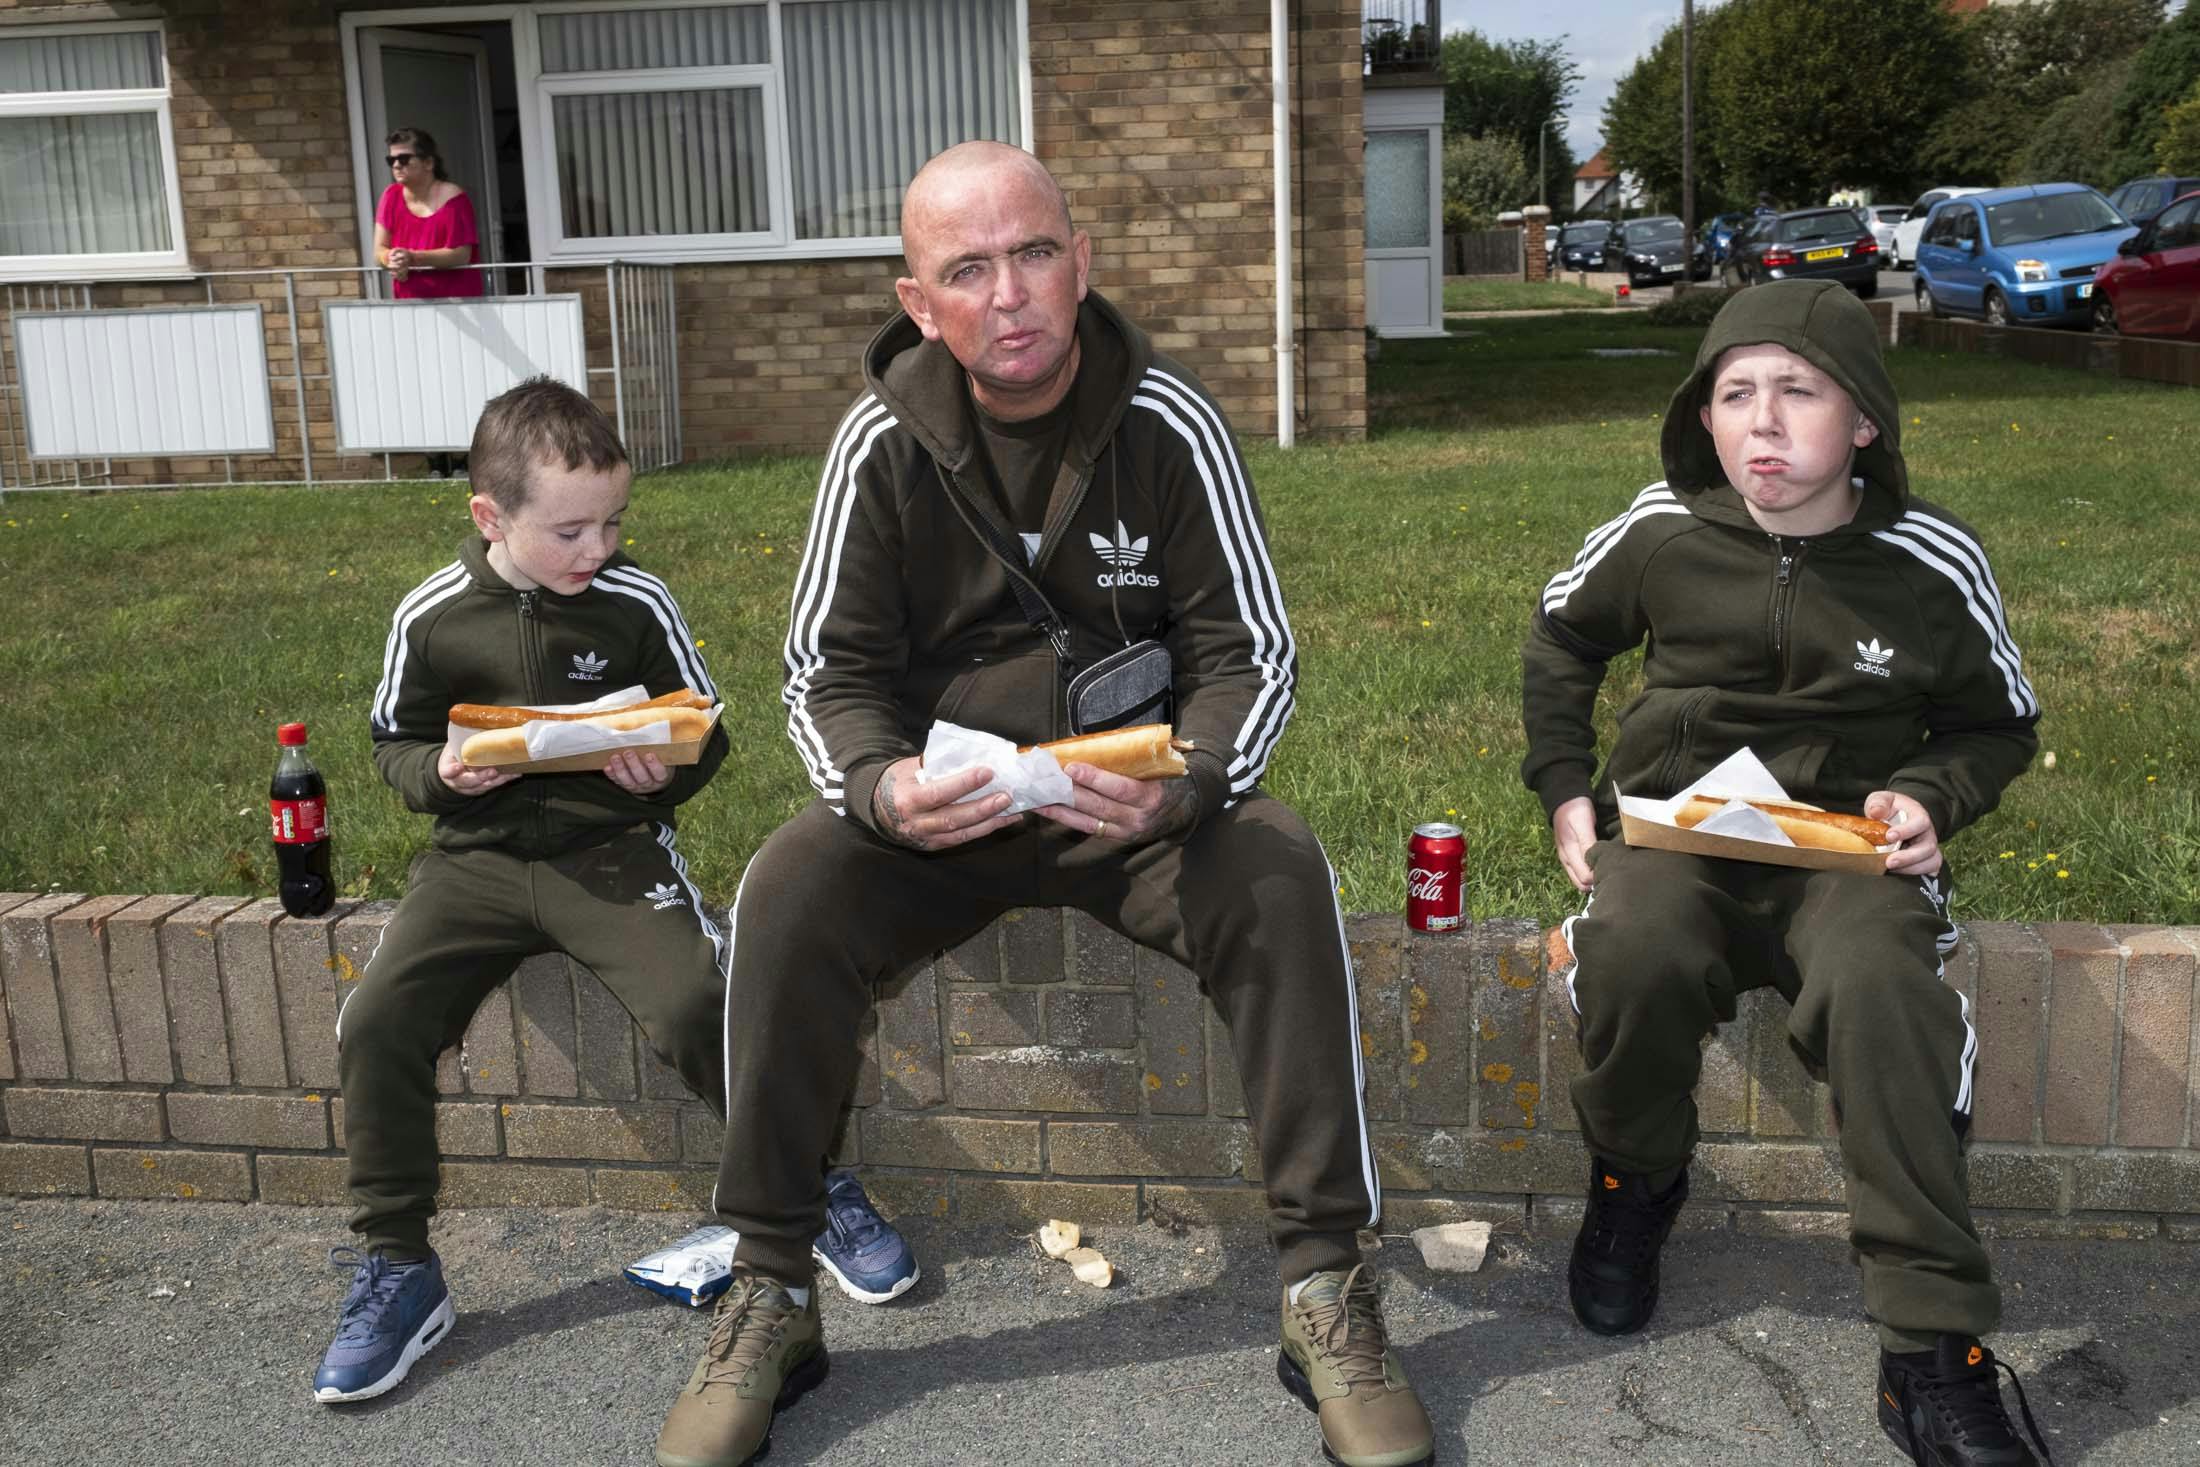 Dad and sons wearing matching green adidas tracksuis eating hotdogs and drinking coke